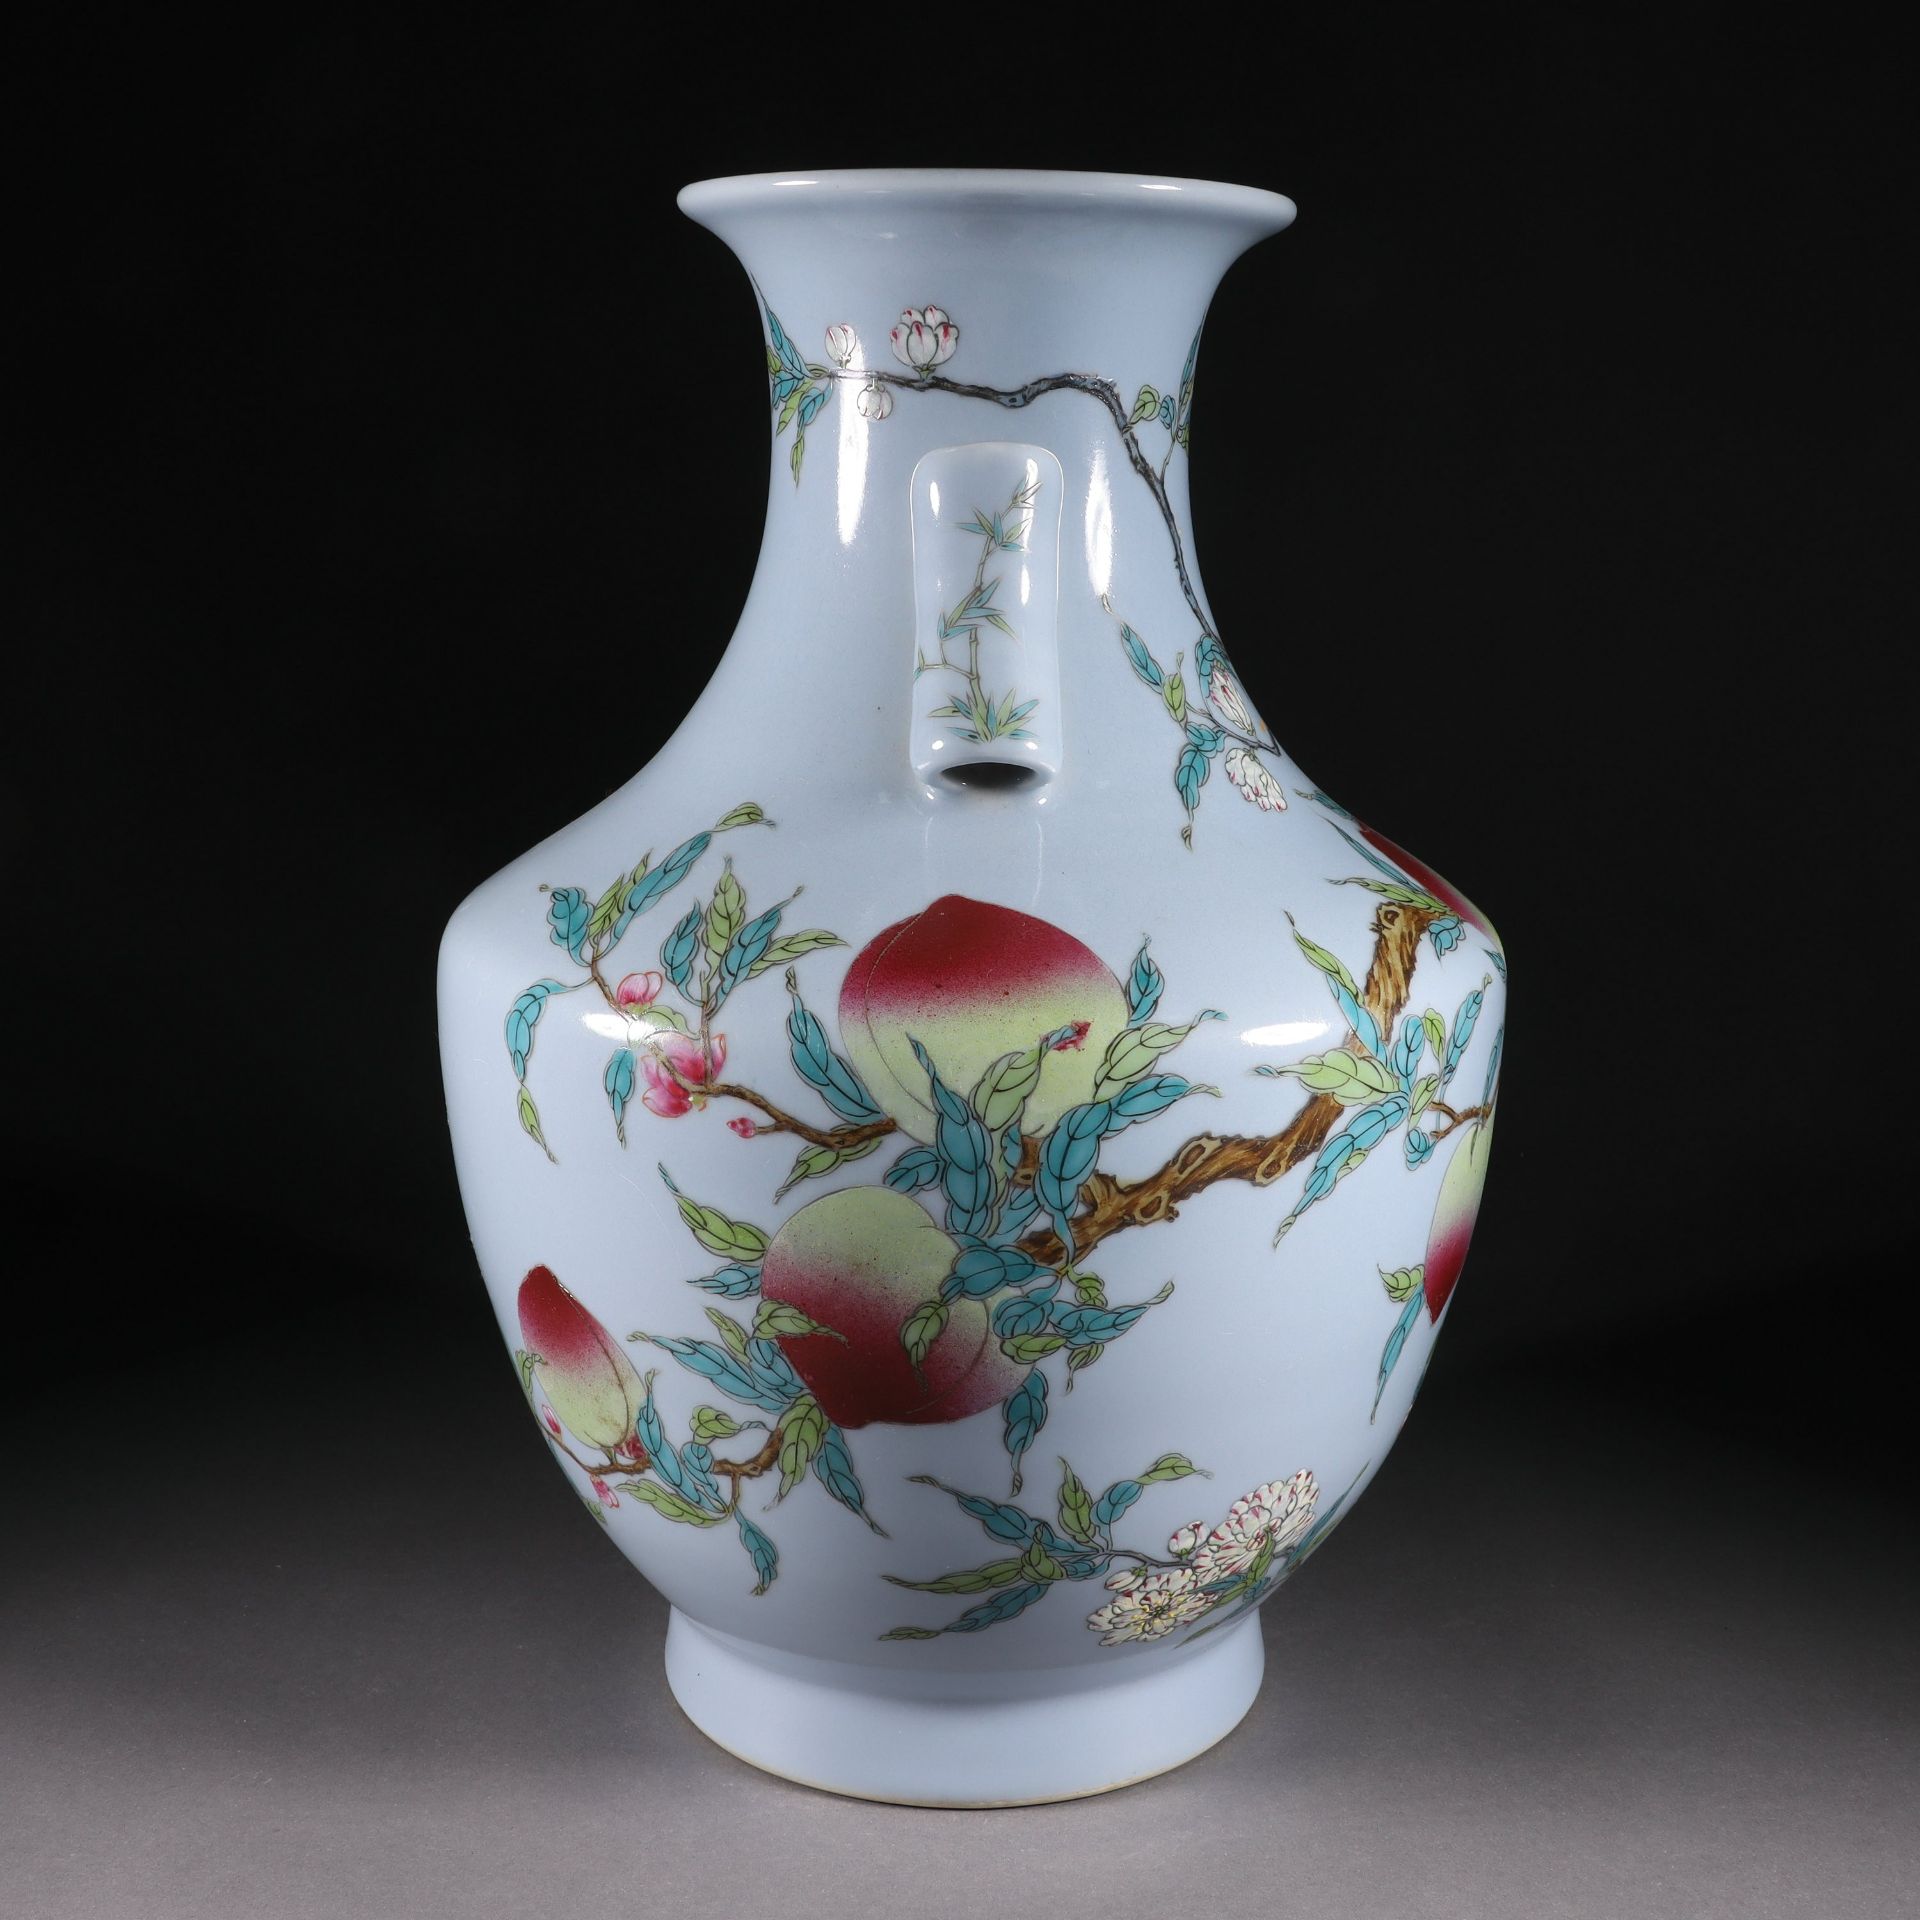 Pastel nine peach amphora from the Qing dynasty - Image 4 of 9